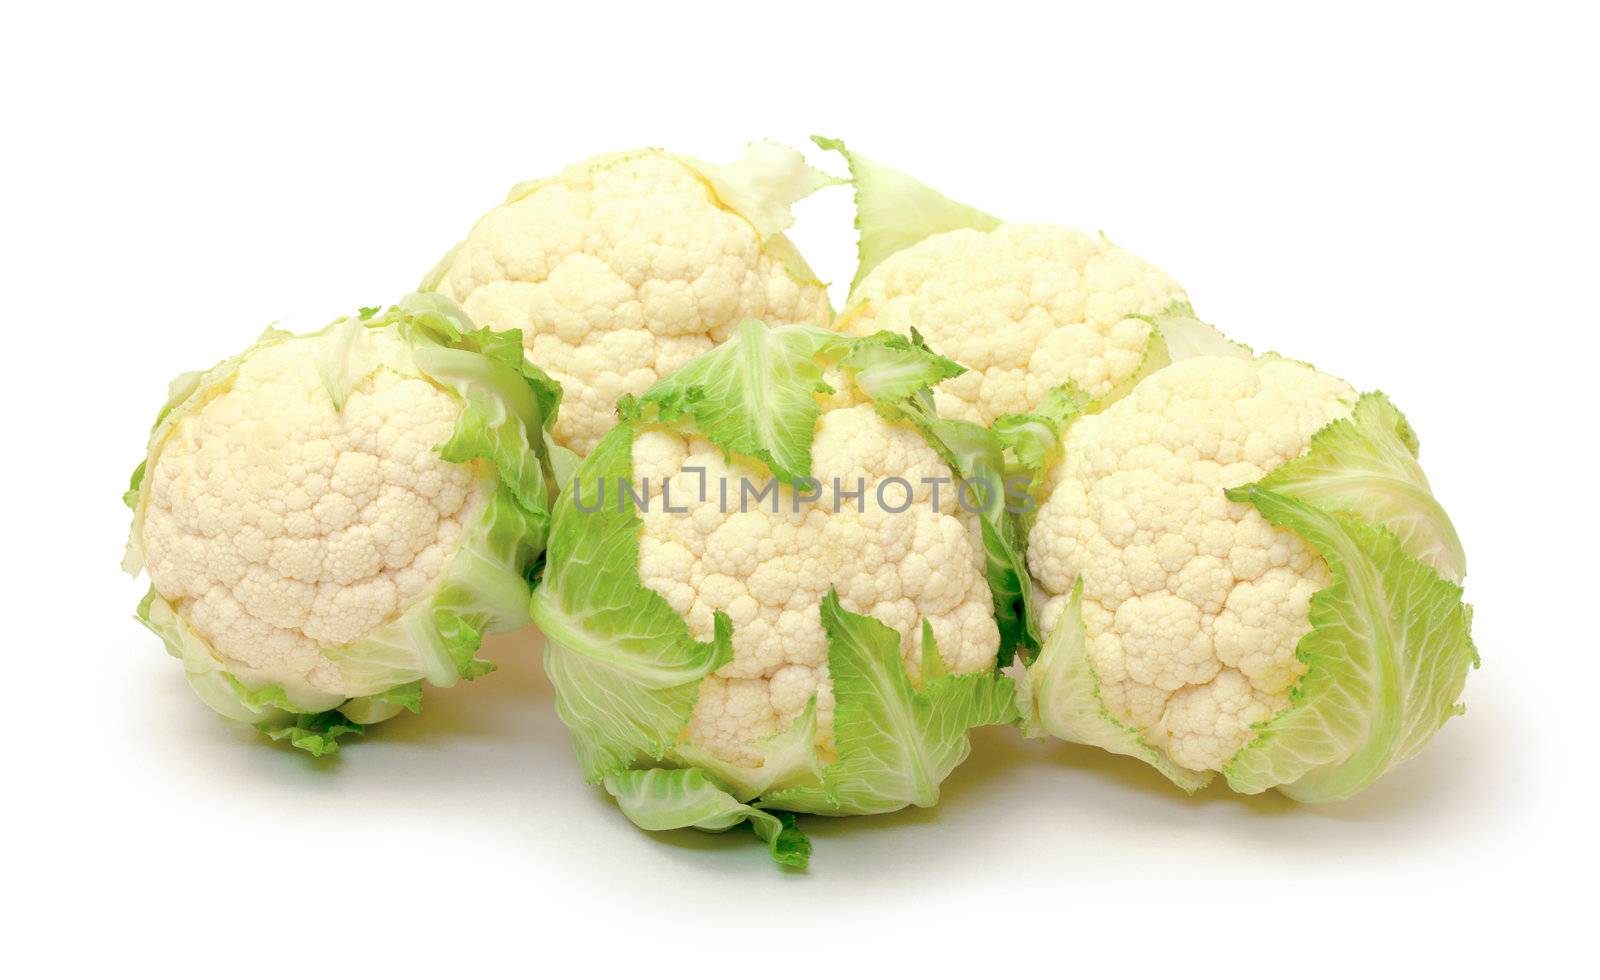 Several Heads of Cabbage Cauliflower on white background